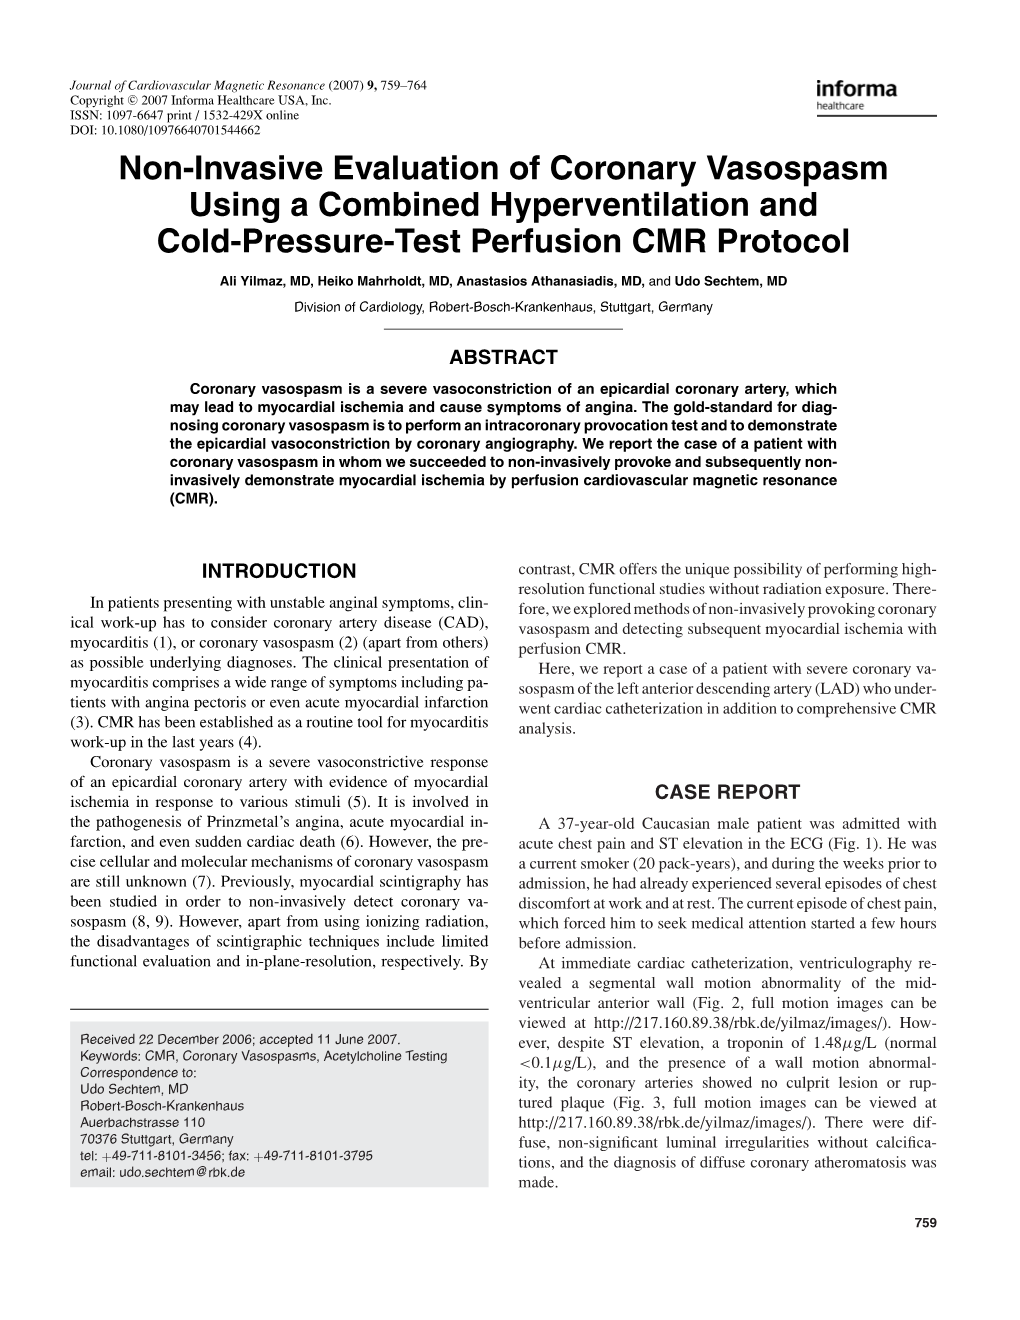 Non-Invasive Evaluation of Coronary Vasospasm Using a Combined Hyperventilation and Cold-Pressure-Test Perfusion CMR Protocol